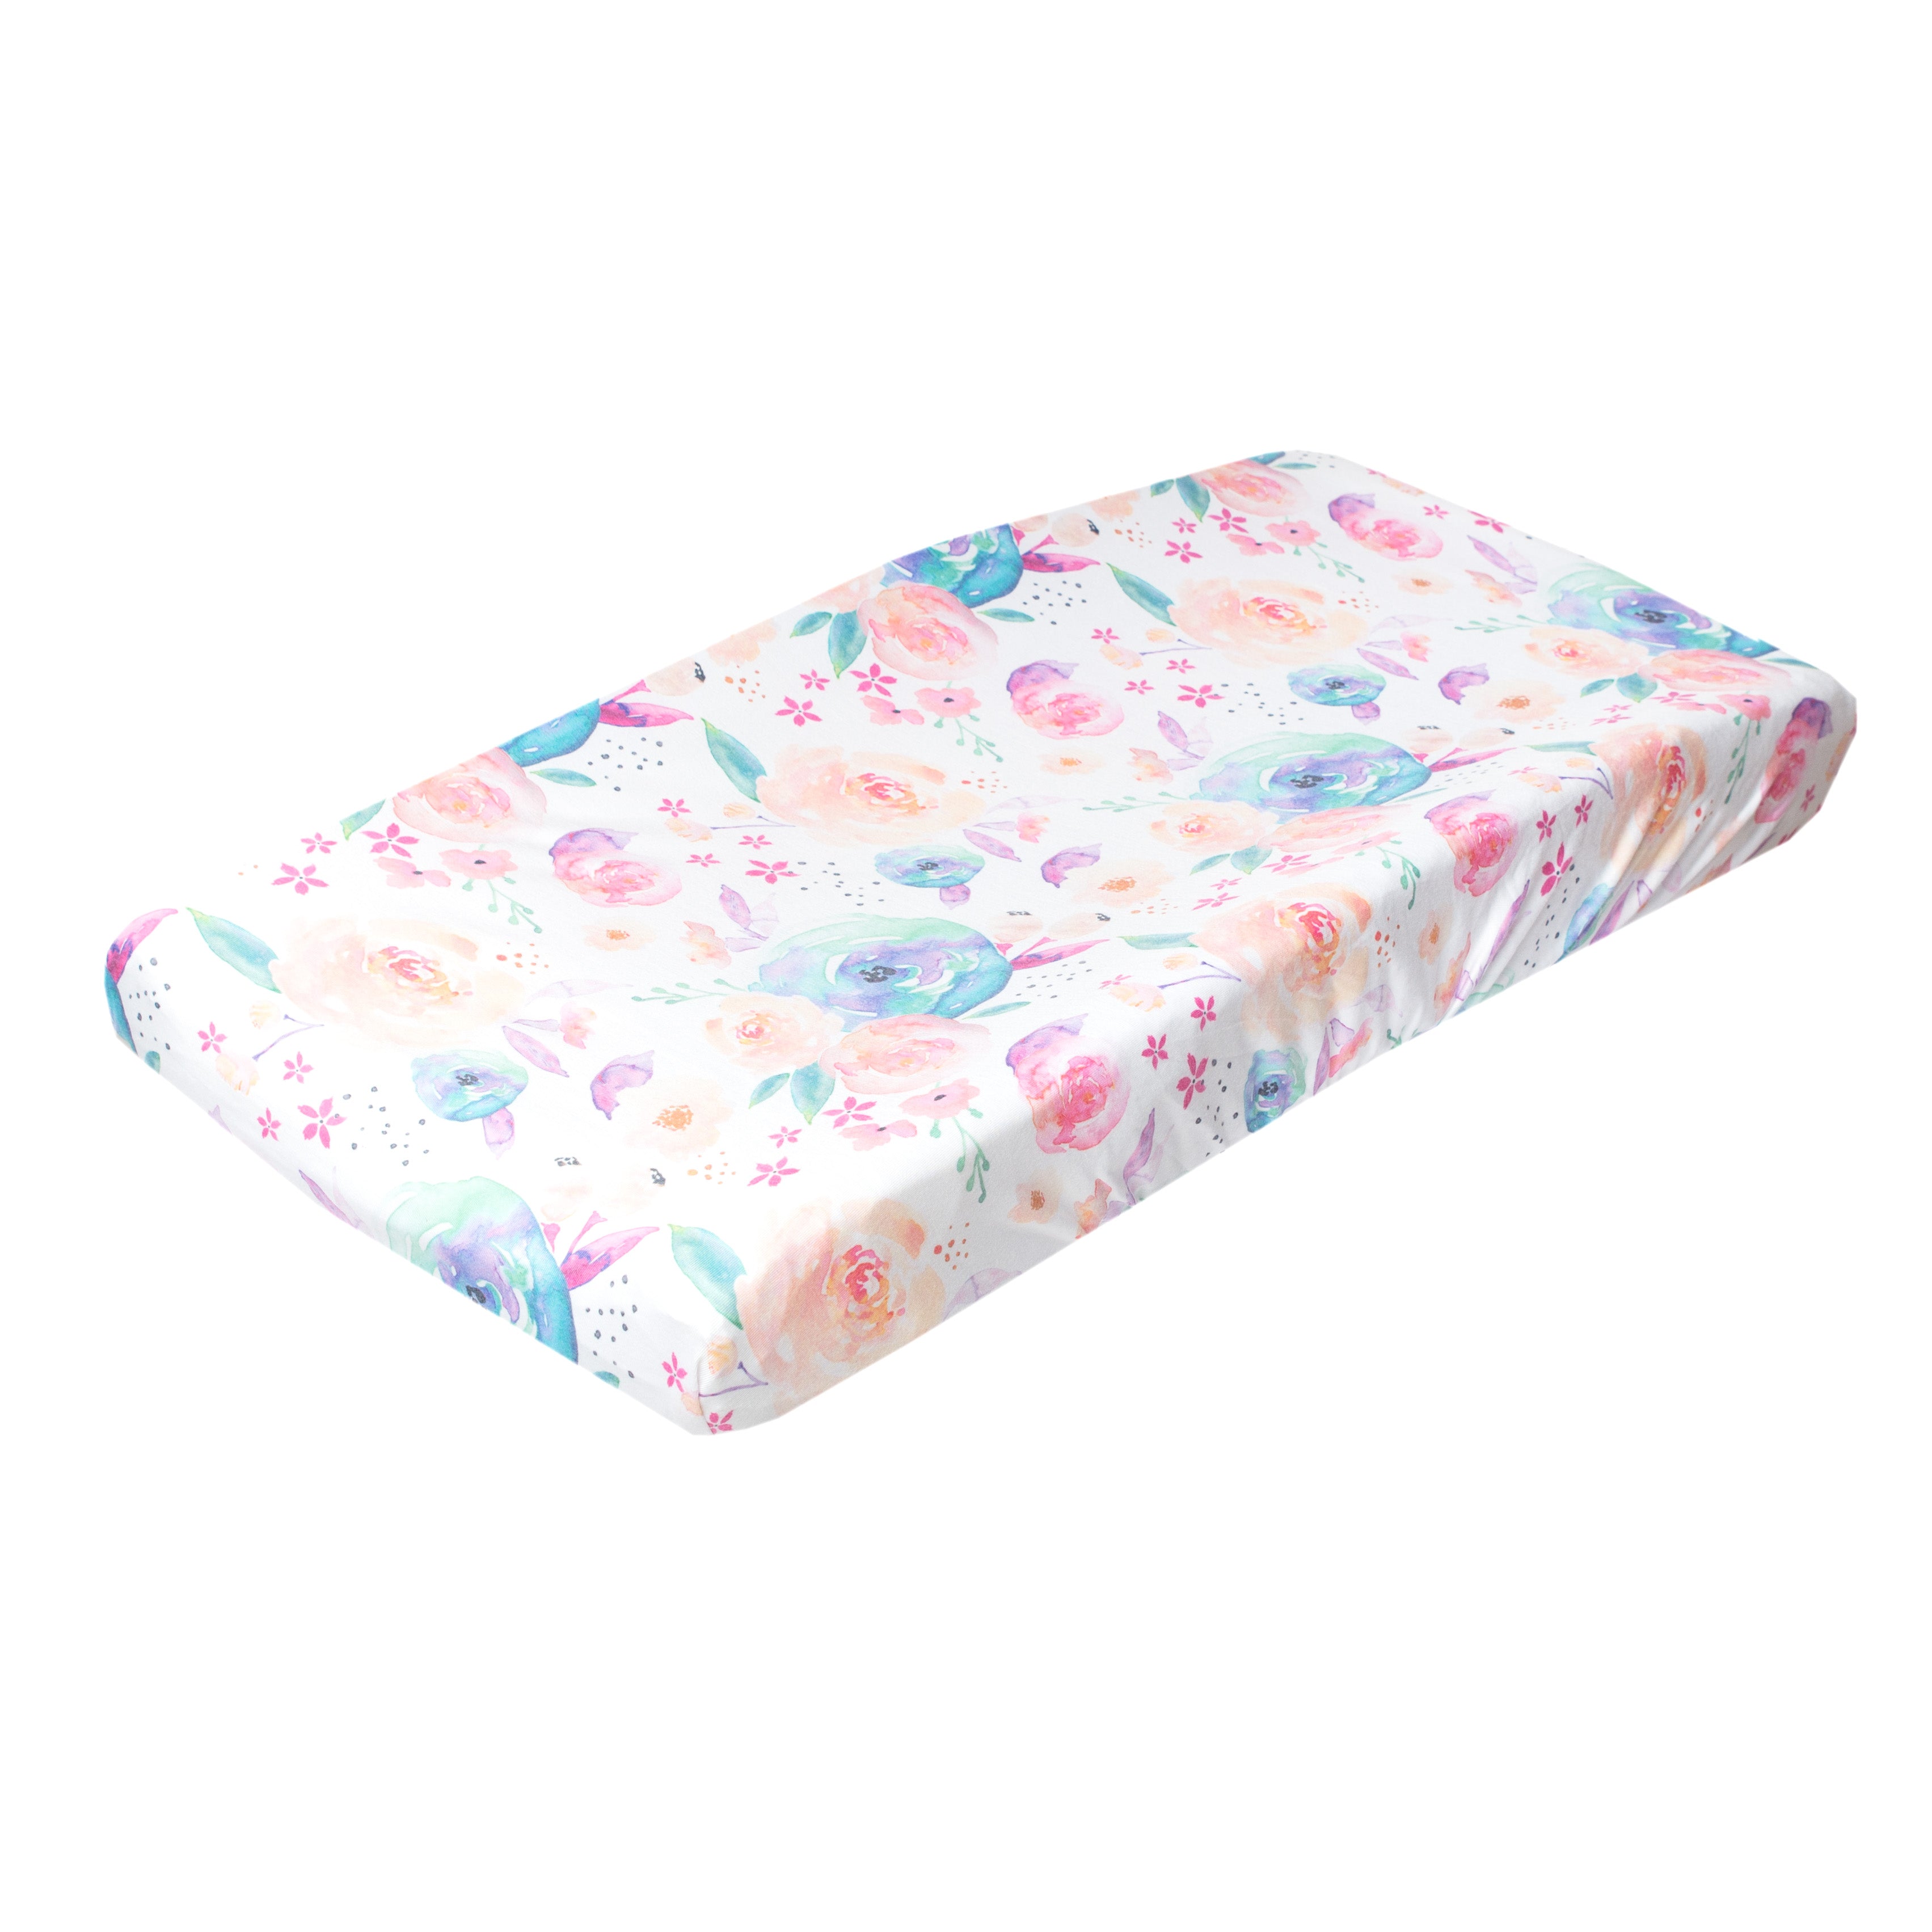 Premium Knit Diaper Changing Pad Cover - Bloom